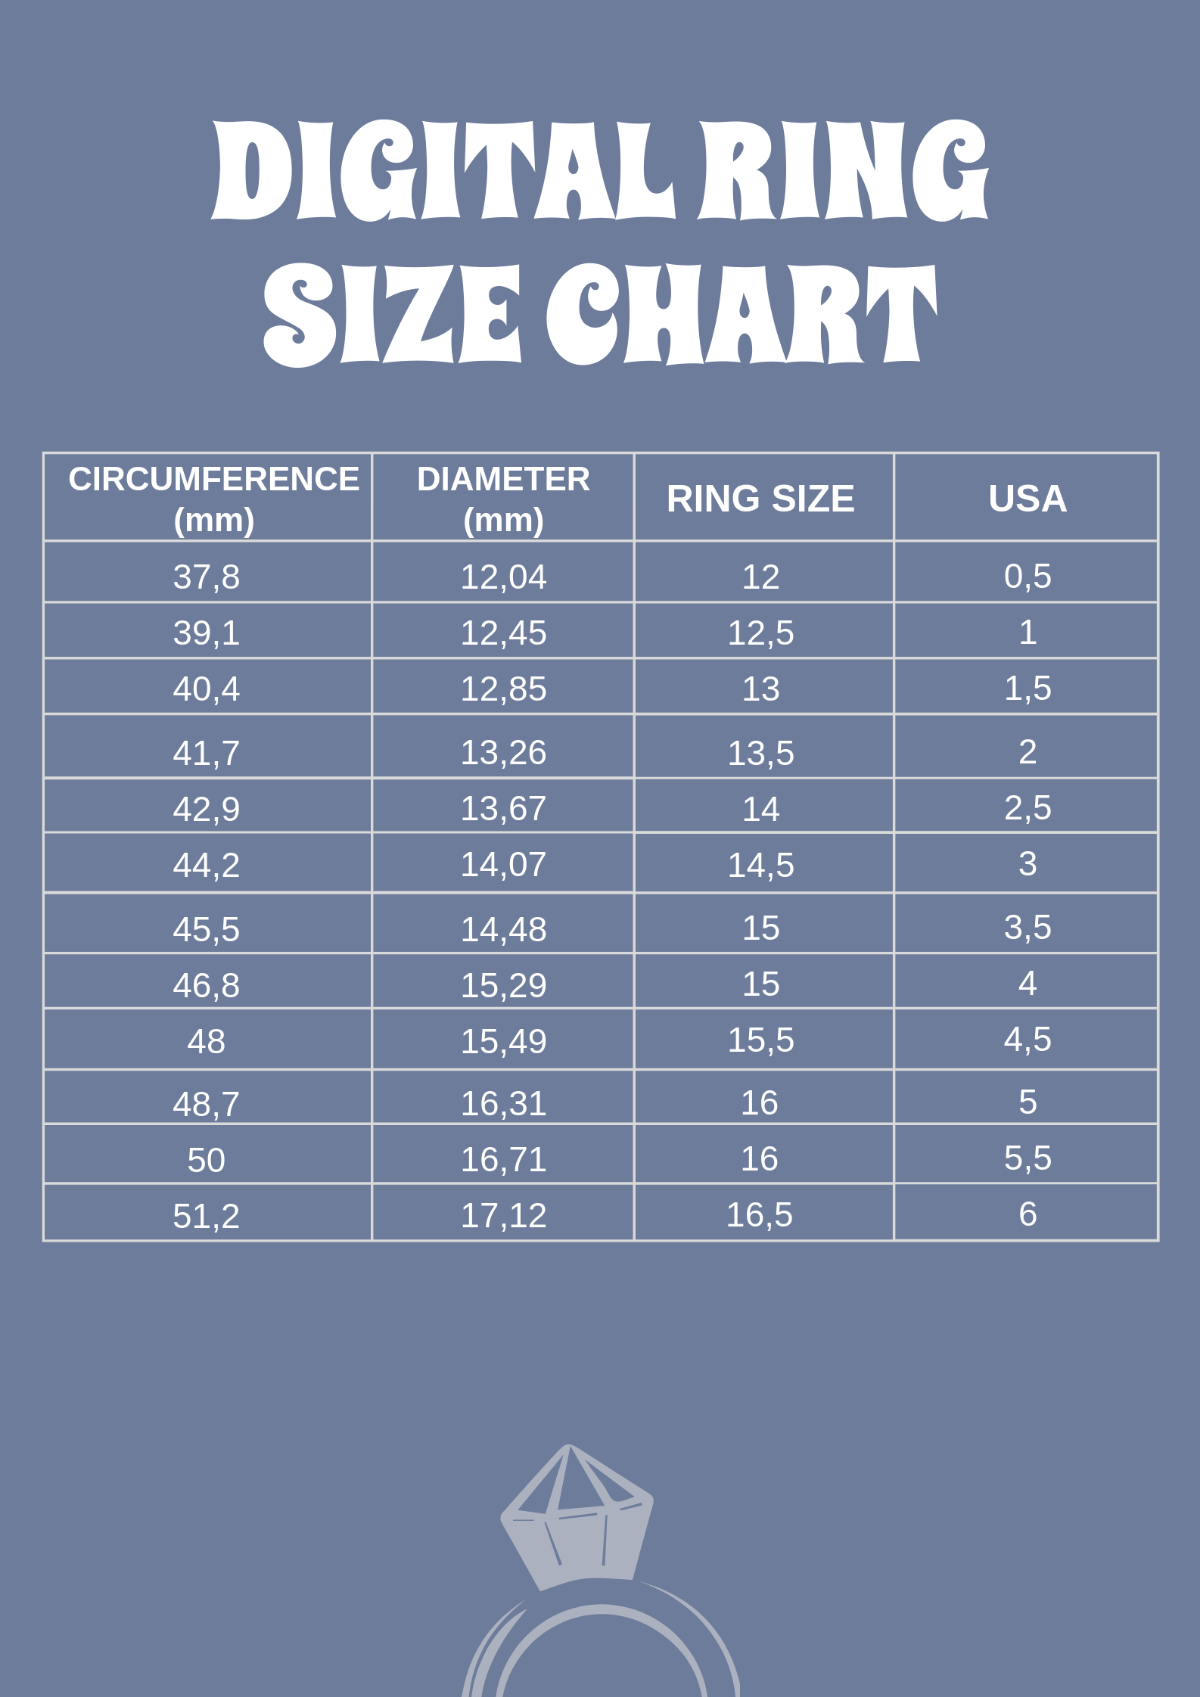 Digital Ring Size Chart Template